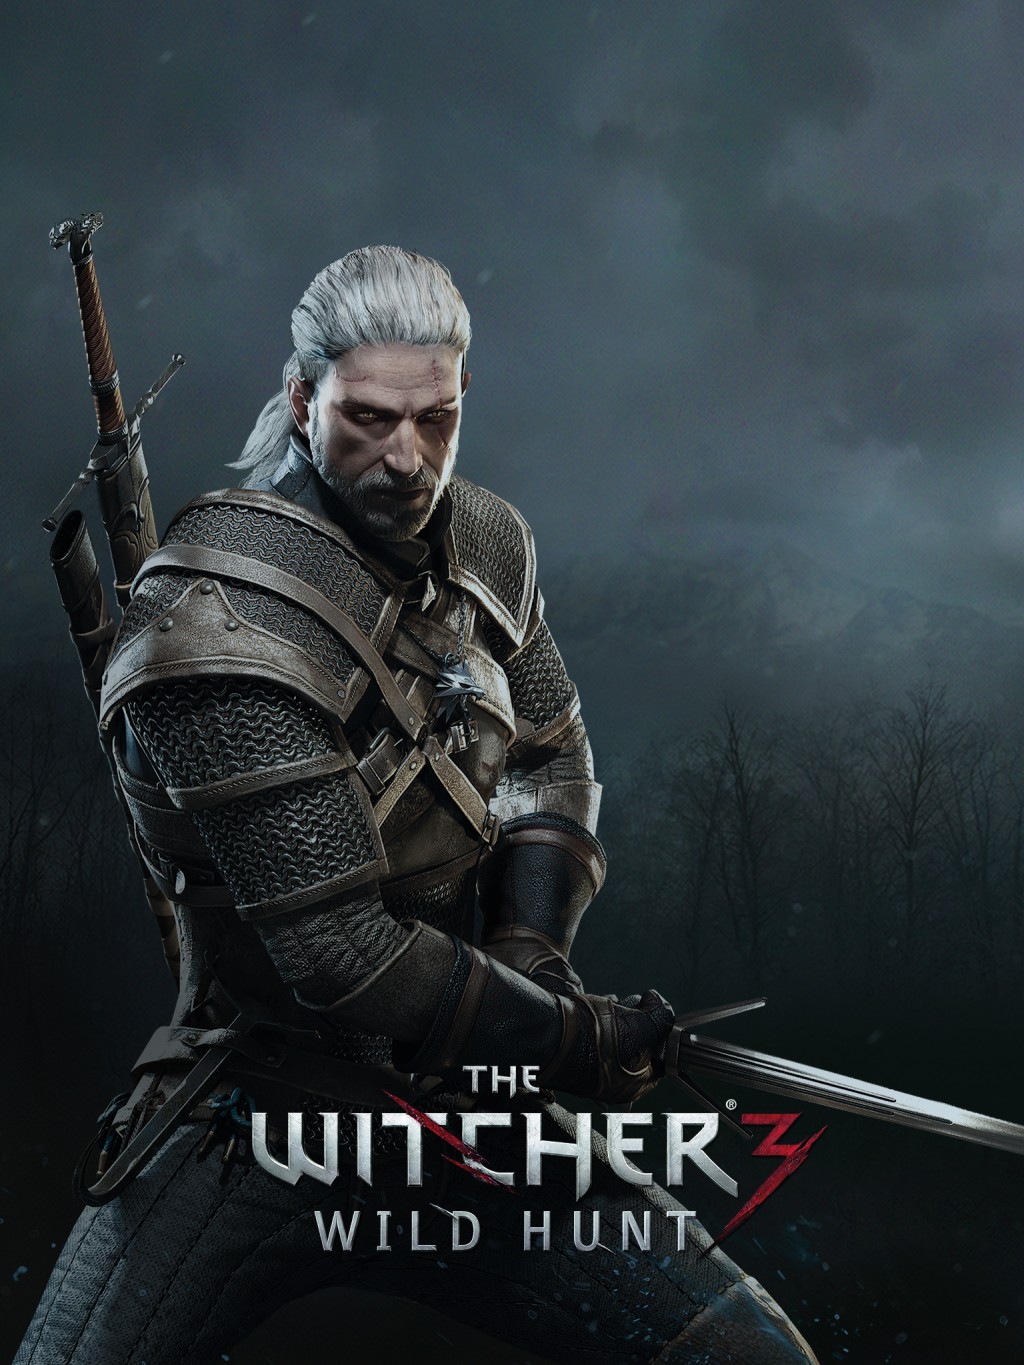 at what time qill the witcher 3 come out on xbox game pass